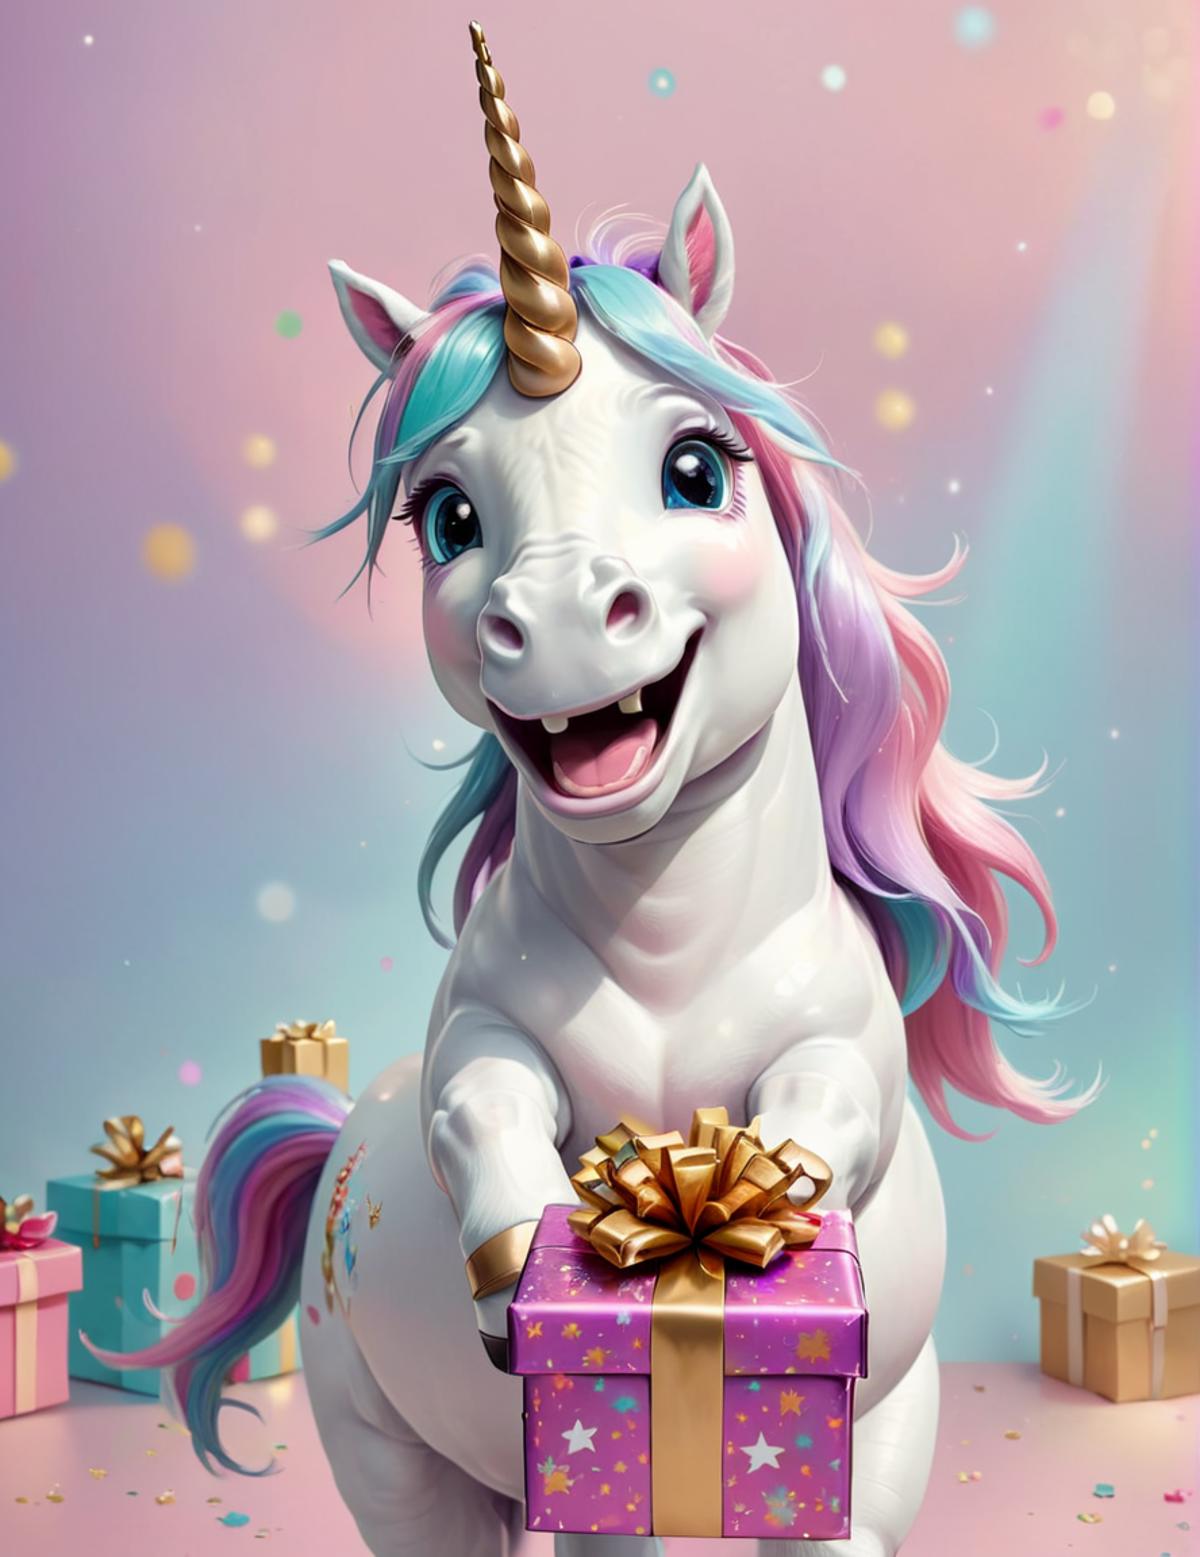 A digital illustration of a white and pink unicorn holding a gift.